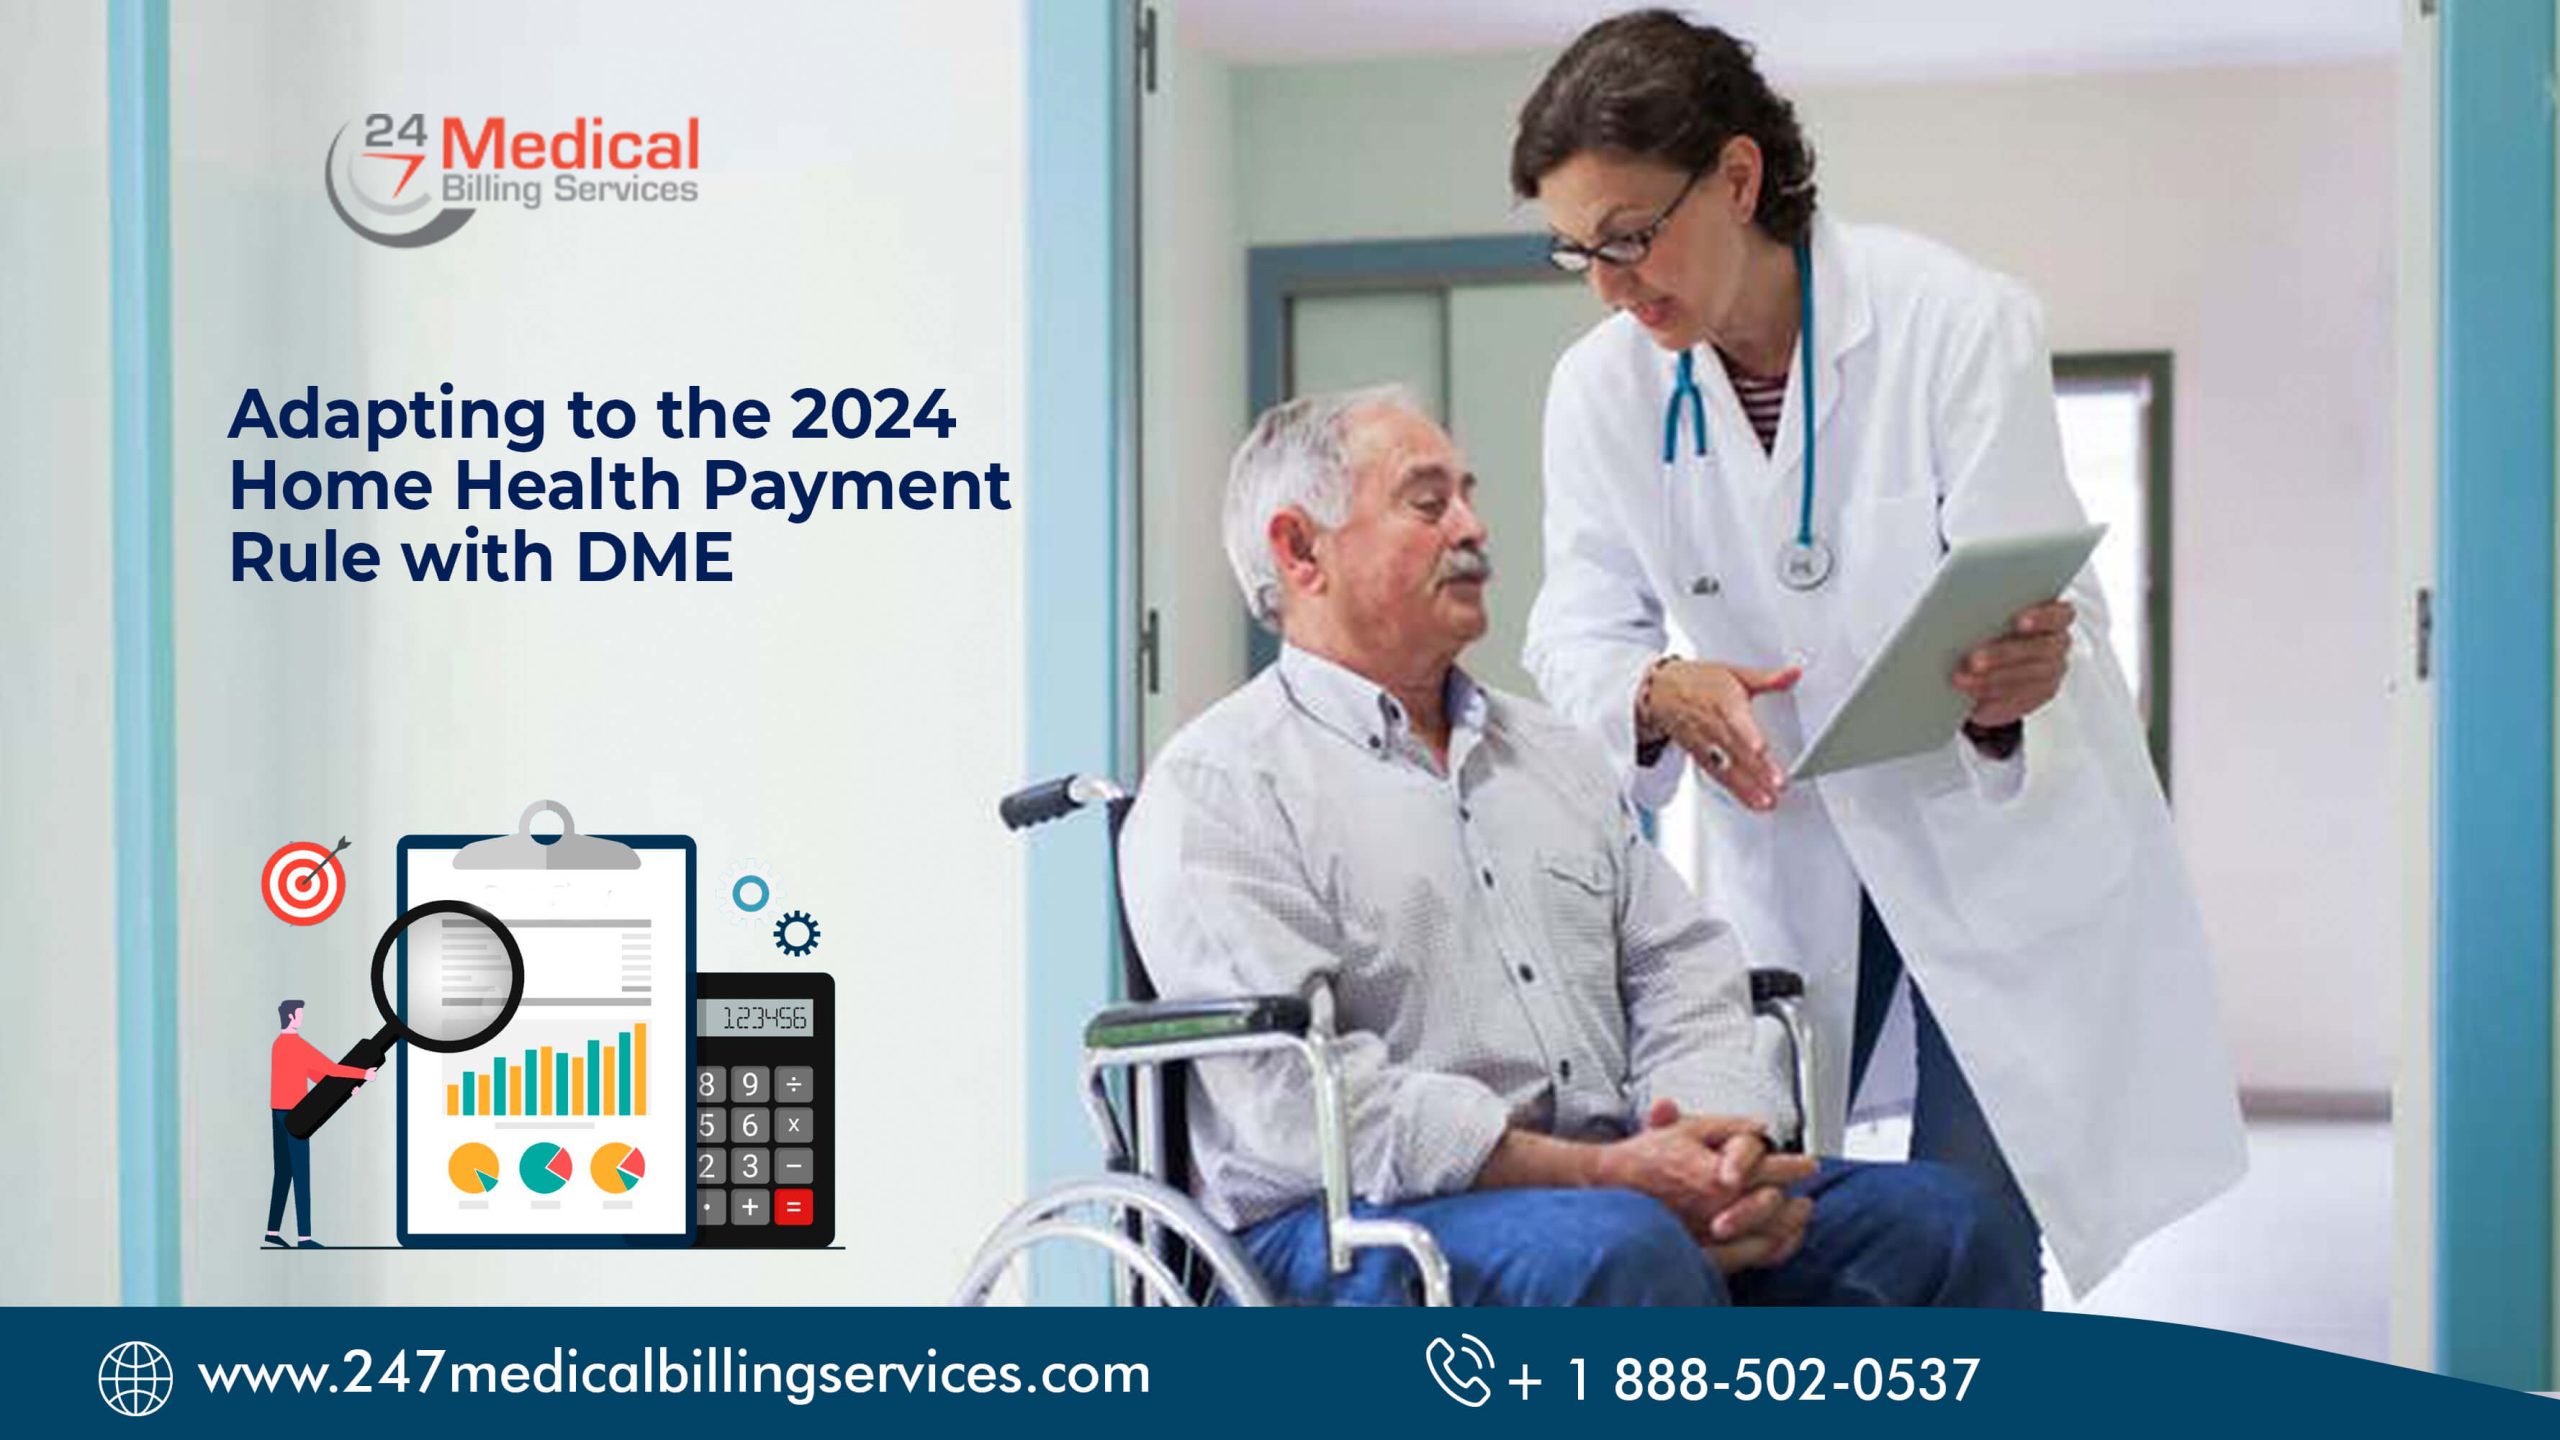  Adapting to the 2024 Home Health Payment Rule with DME